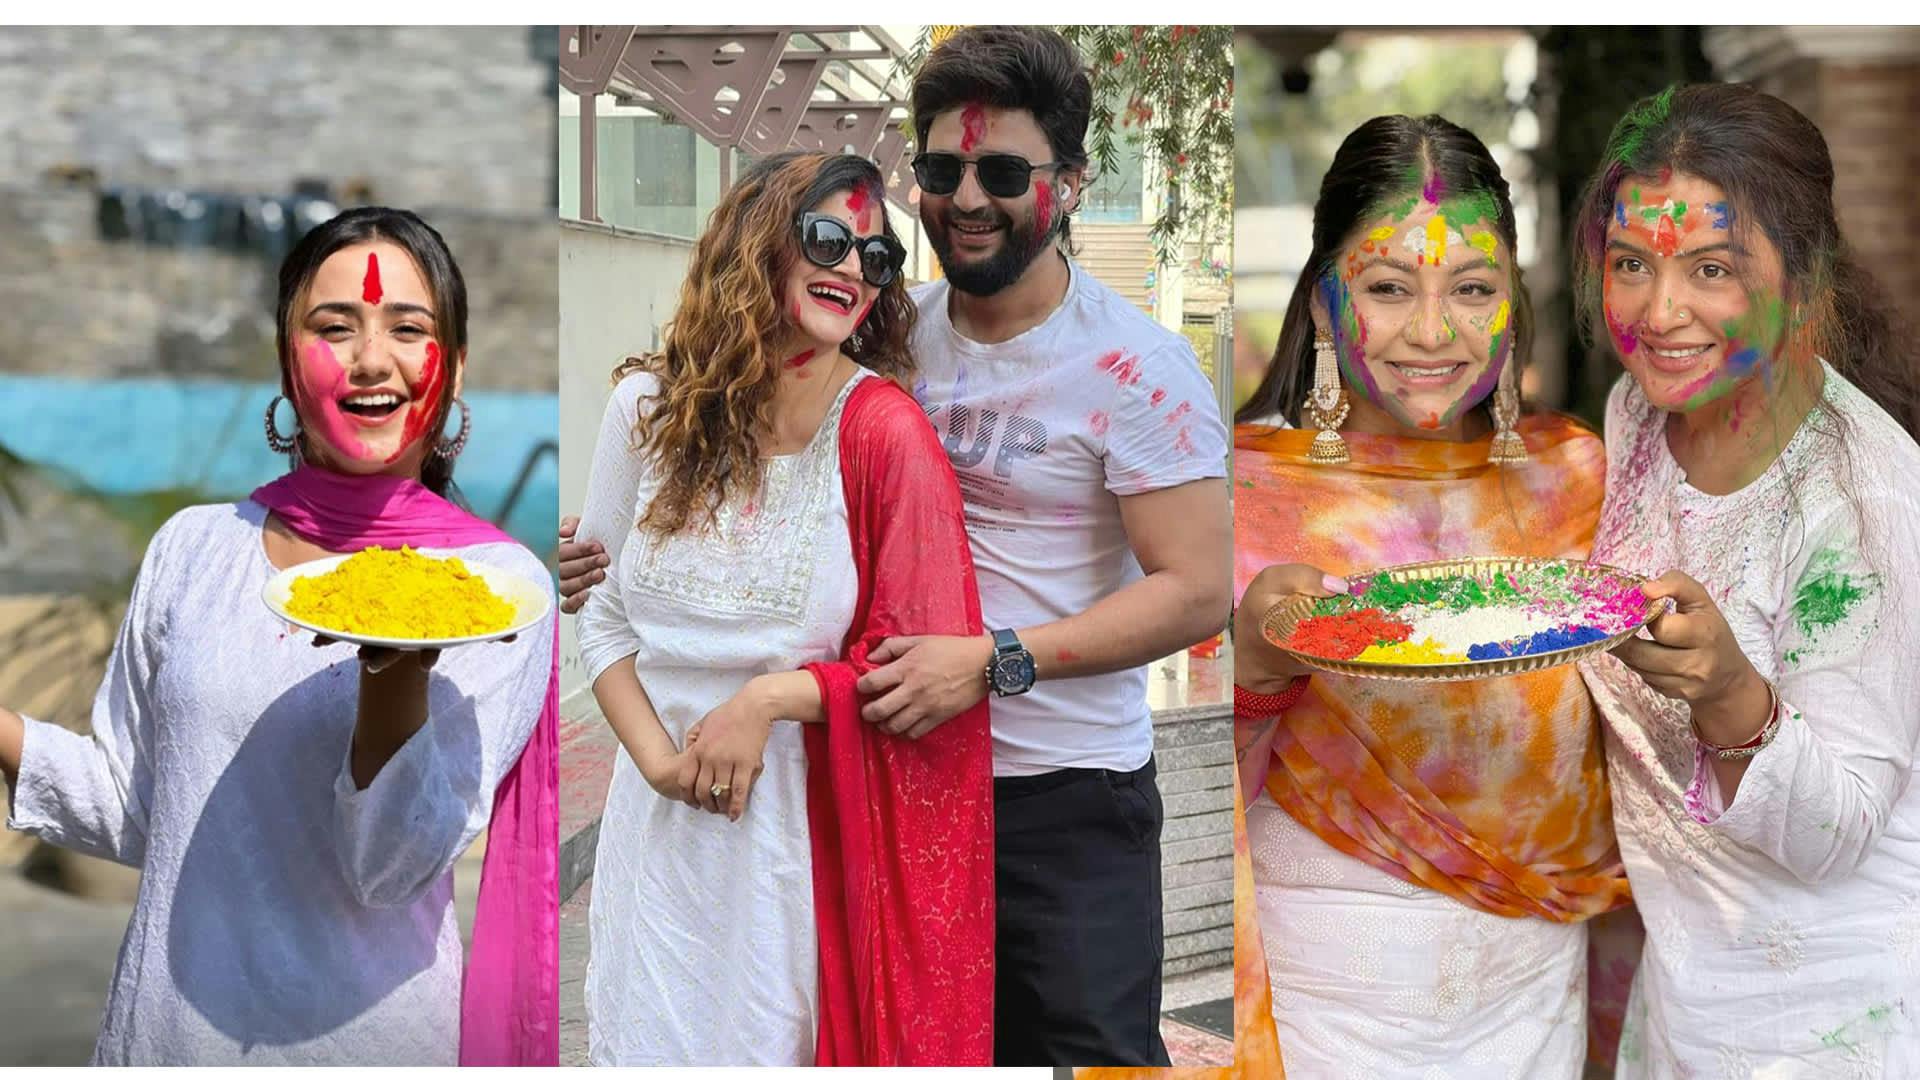 Actors from film and music fields celebrated Holi